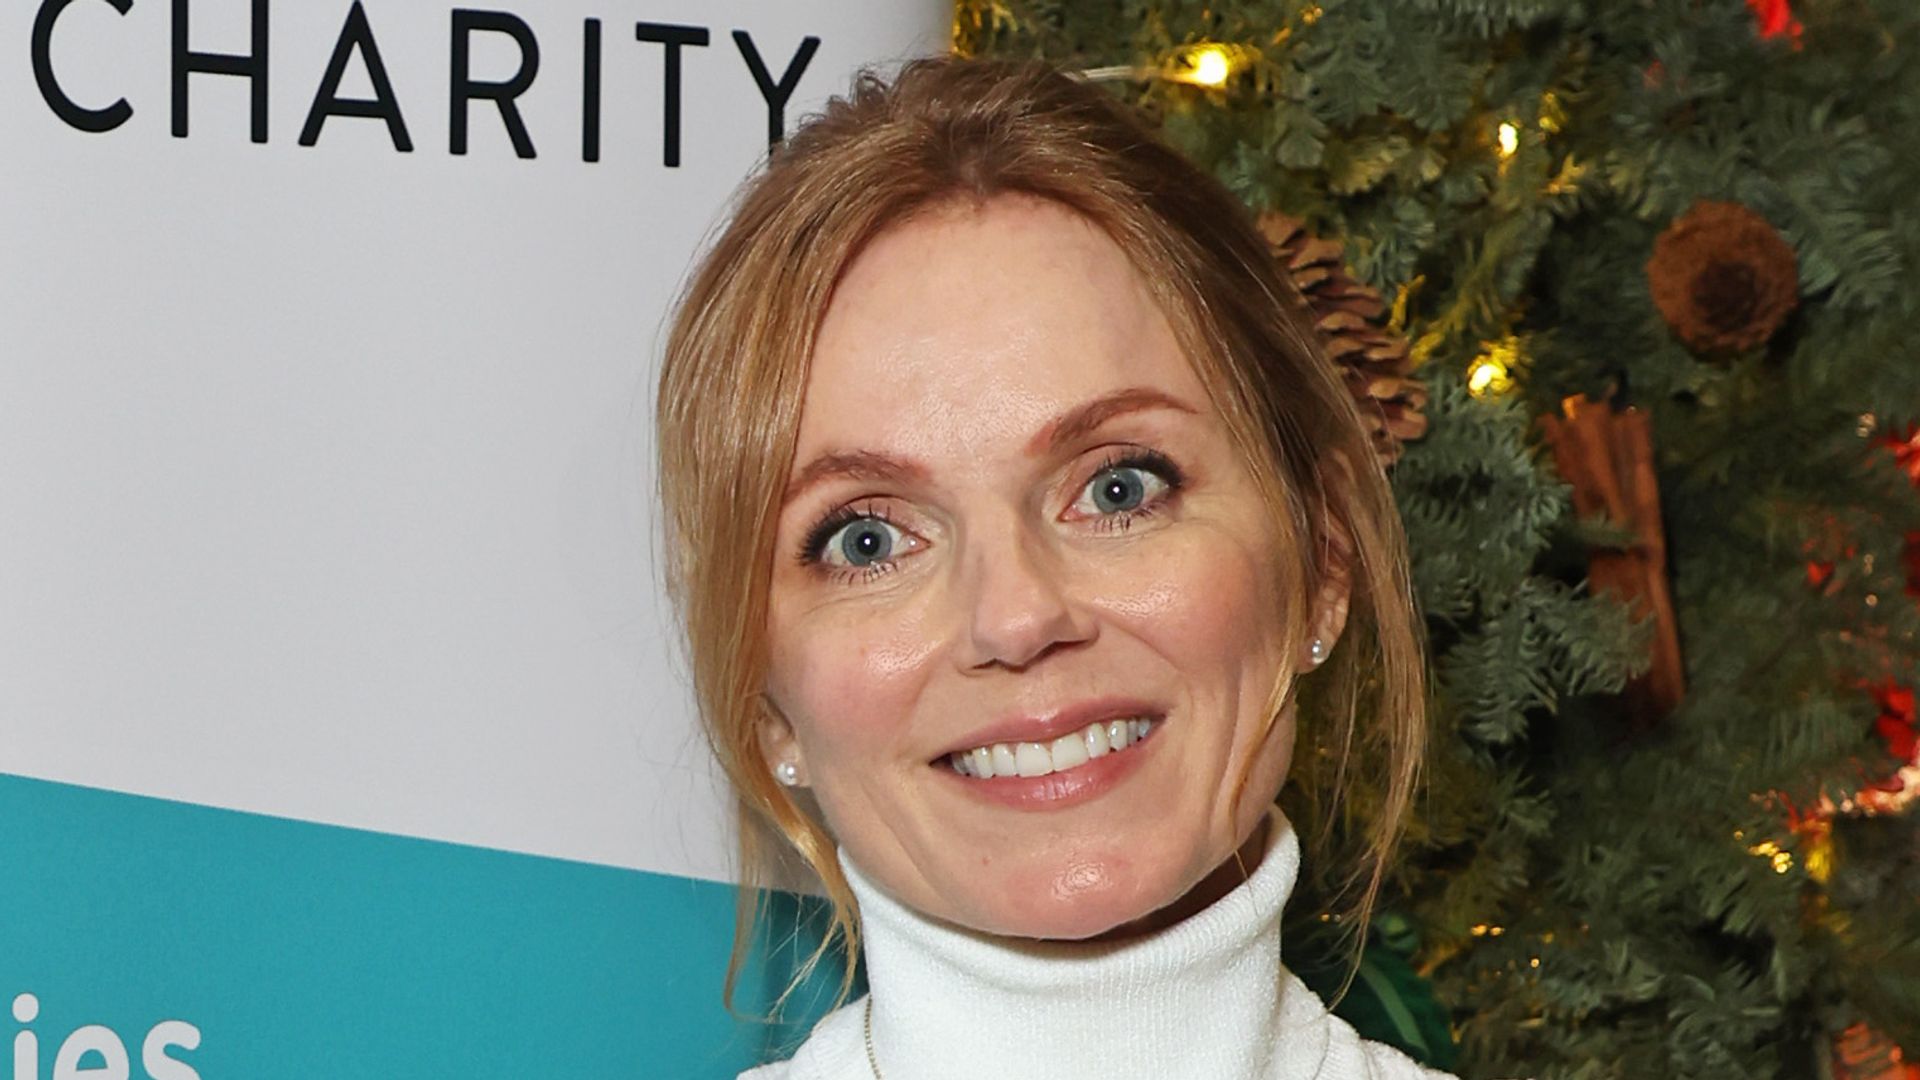 Geri Halliwell-Horner in white dress stood in front of a sign for the Rainbow Trust